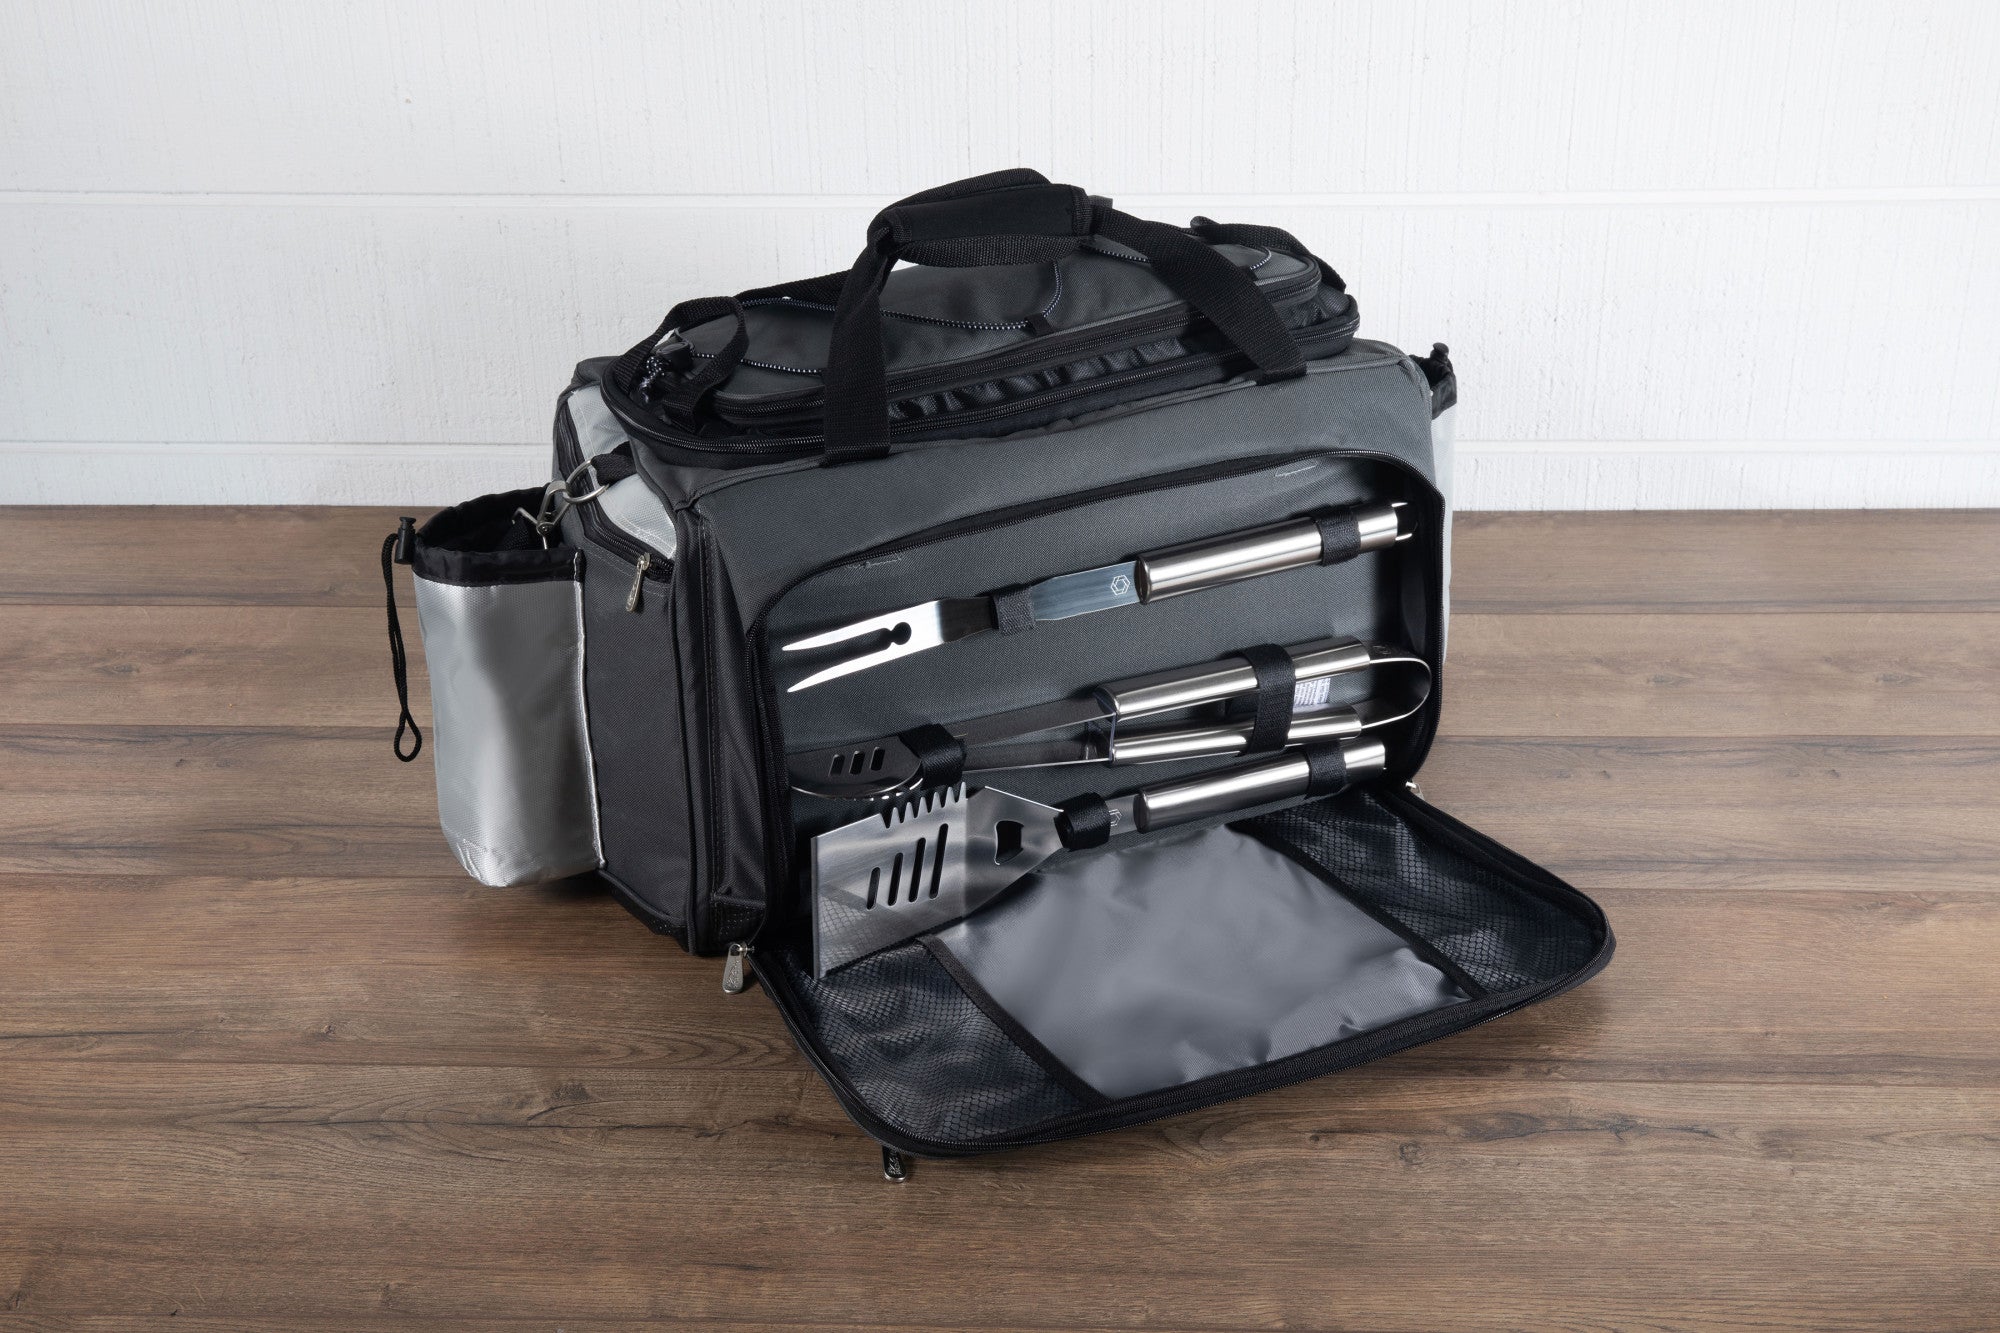 Army Black Knights - Vulcan Portable Propane Grill & Cooler Tote